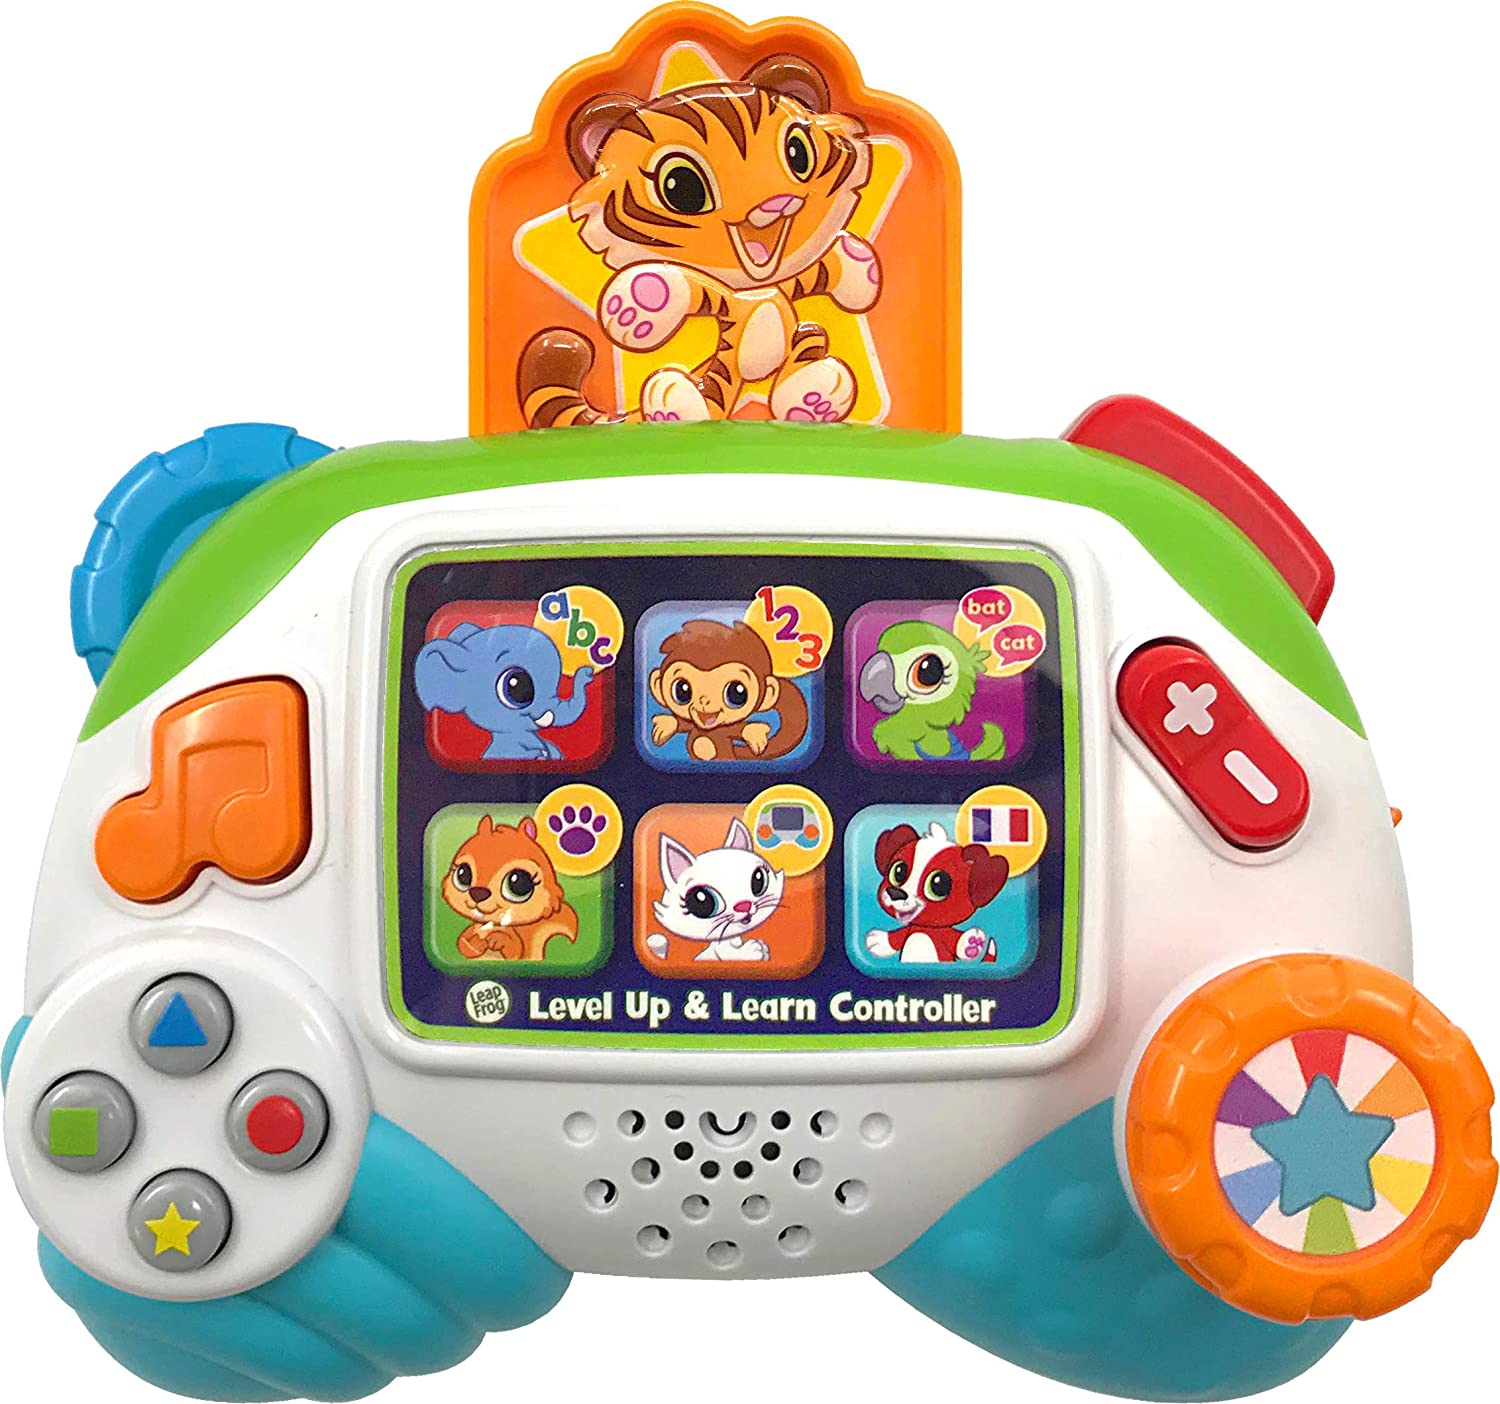 LeapFrog Level Up & Learn Control